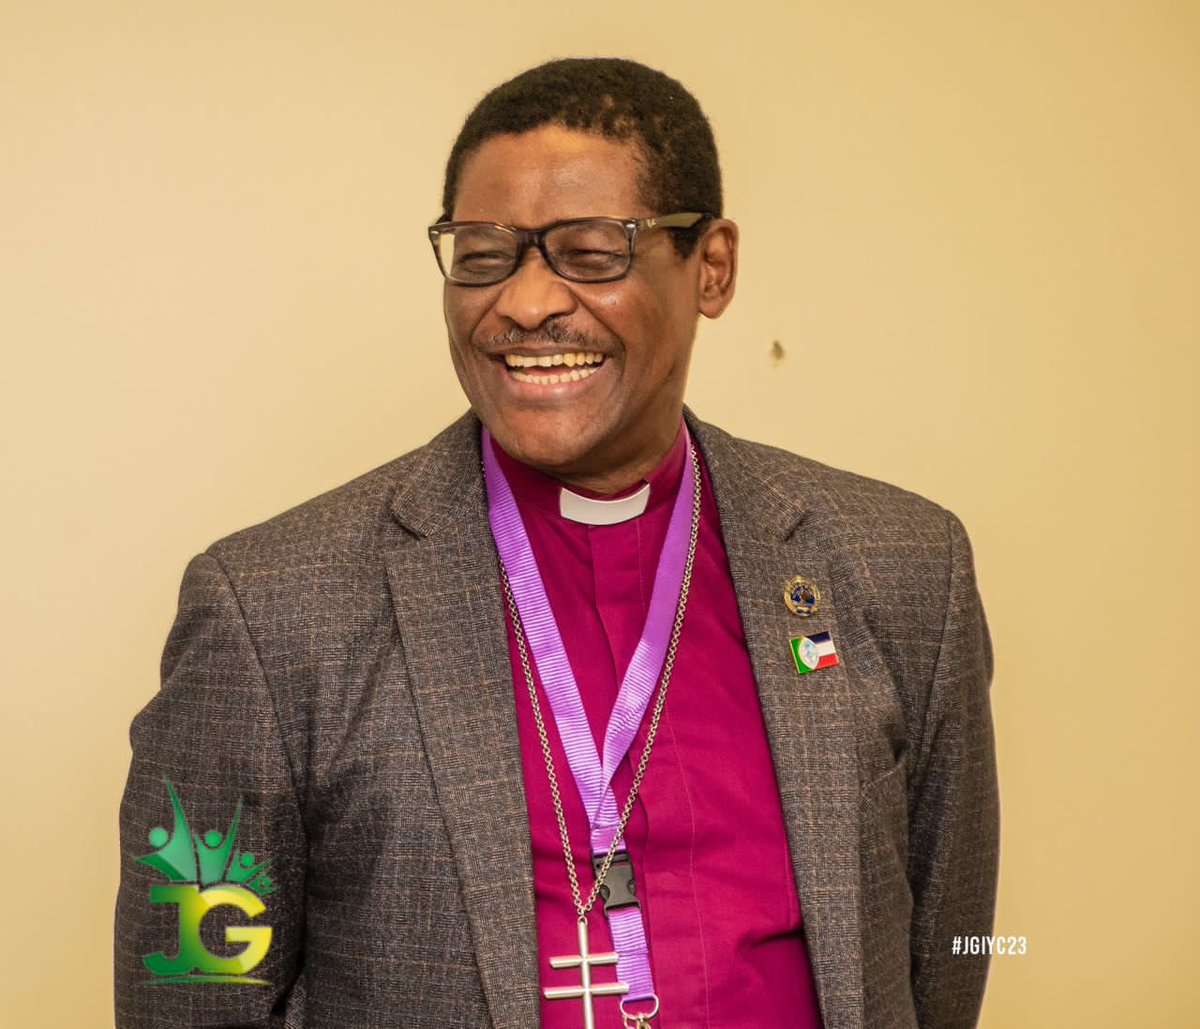 Our Daddy, the Primate of all Nigeria, Most Revd. Dr. Henry C. Ndukuba, is saying
 'THANK YOU FOR ATTENDING JGIYC 2023'.

What do you have to say in return to Daddy?🤔

#joshuageneration #youth #chosengeneration #jgiyc2023